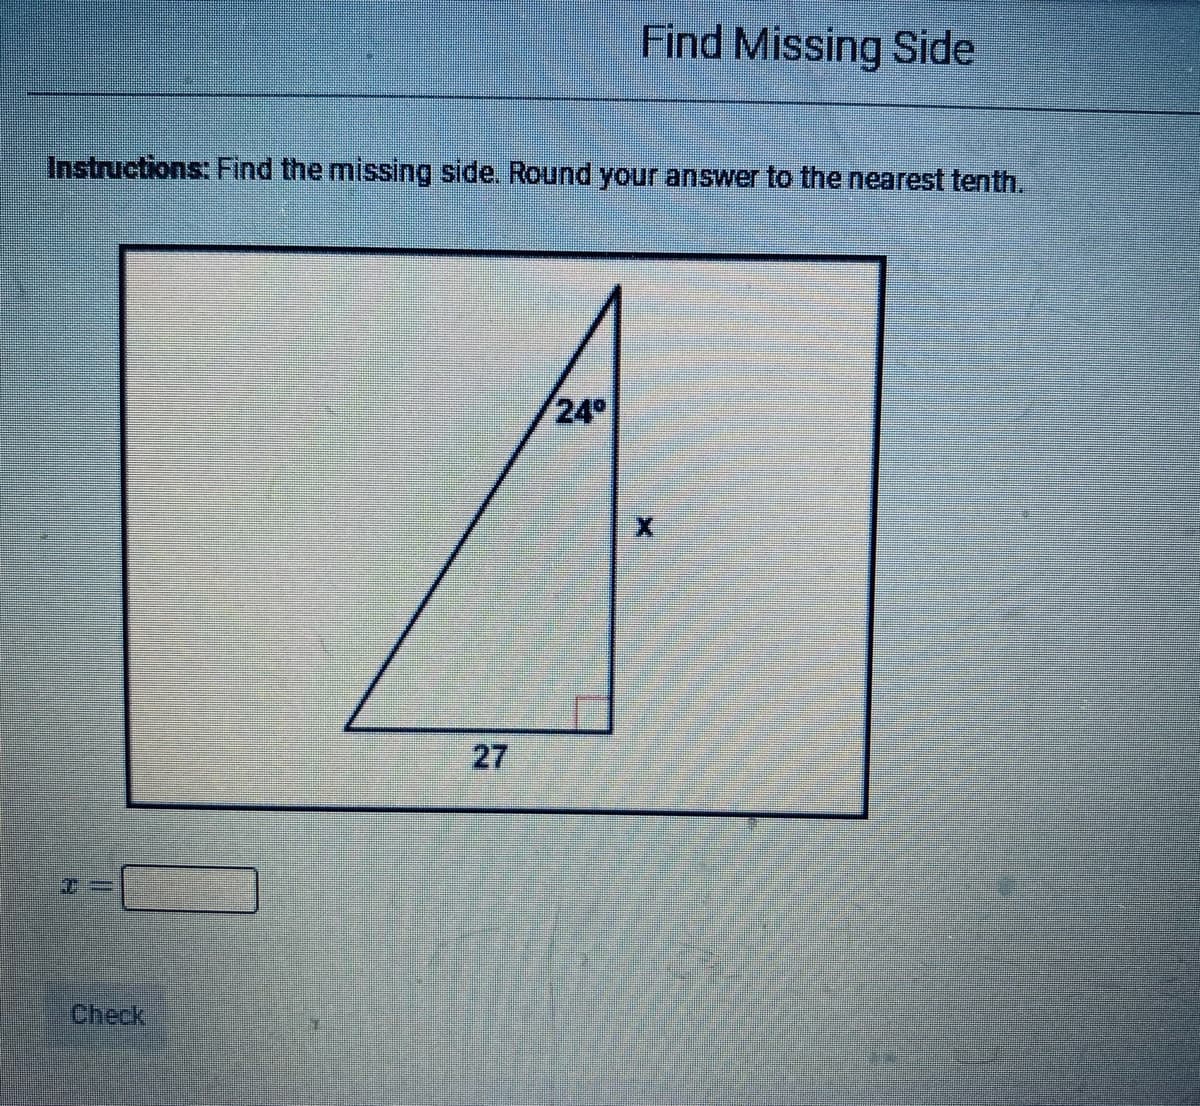 Find Missing Side
Instructions: Find the missing side. Round your answer to the nearest tenth.
24°
Check
27
